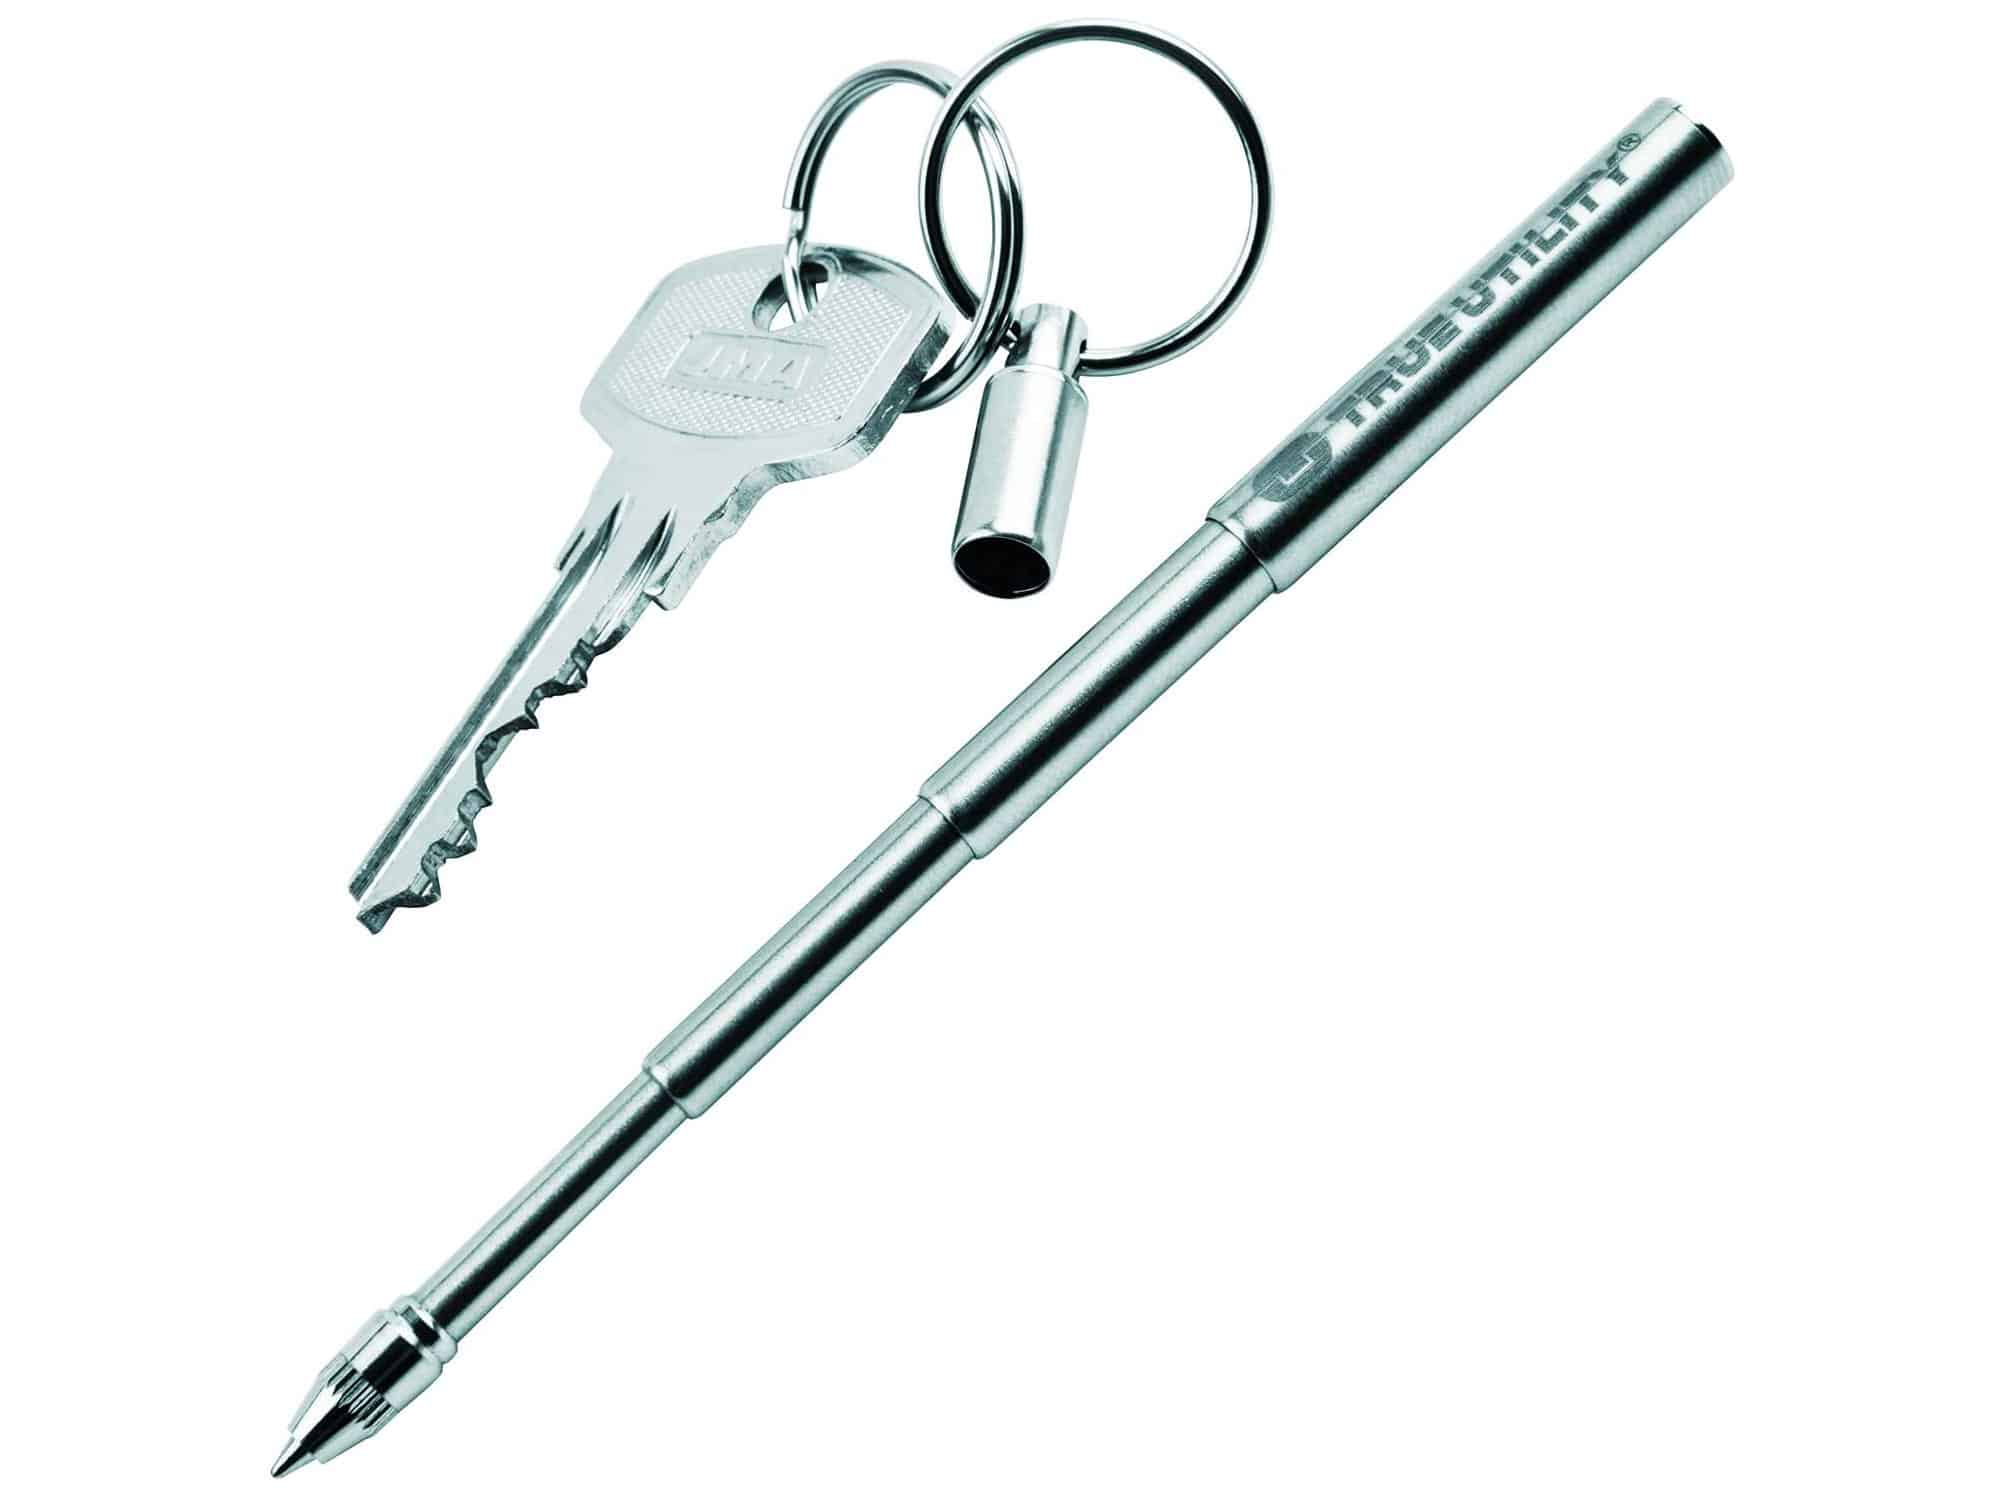 True Utility Stainless Steel Pen Keychain: This Cool Keychain is Engineered to be the Smallest pocket pen, Coolest Keychain Accessories, and the most useful dad gadgets ever seen - TelePen TU246, Silver, One-Size